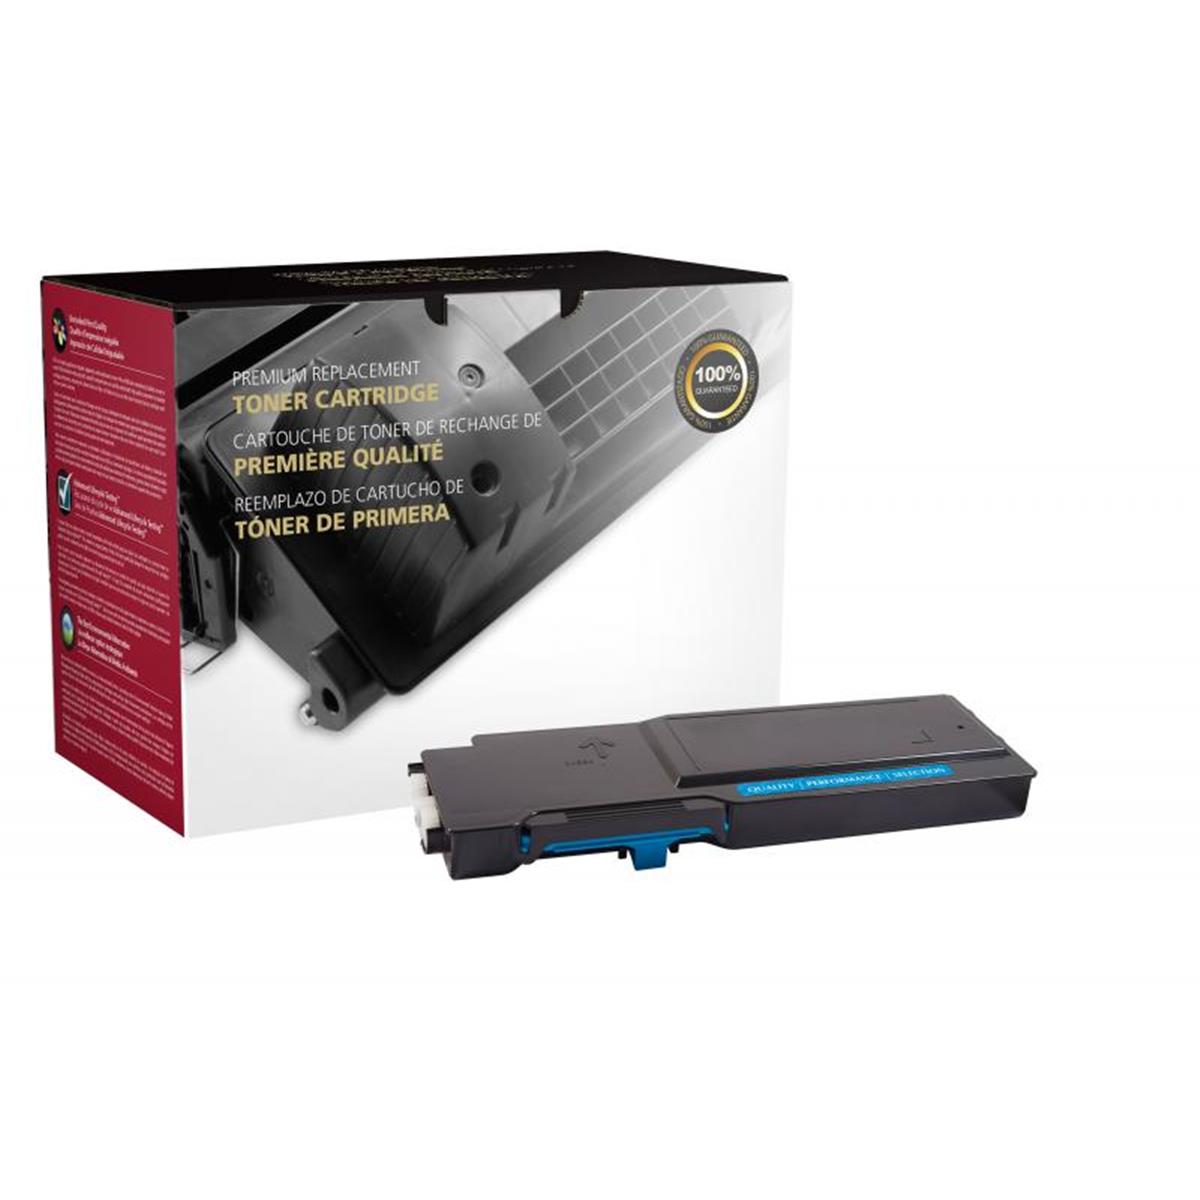 Picture of Dell 200736 High Yield Cyan Toner Cartridge for Dell C3760